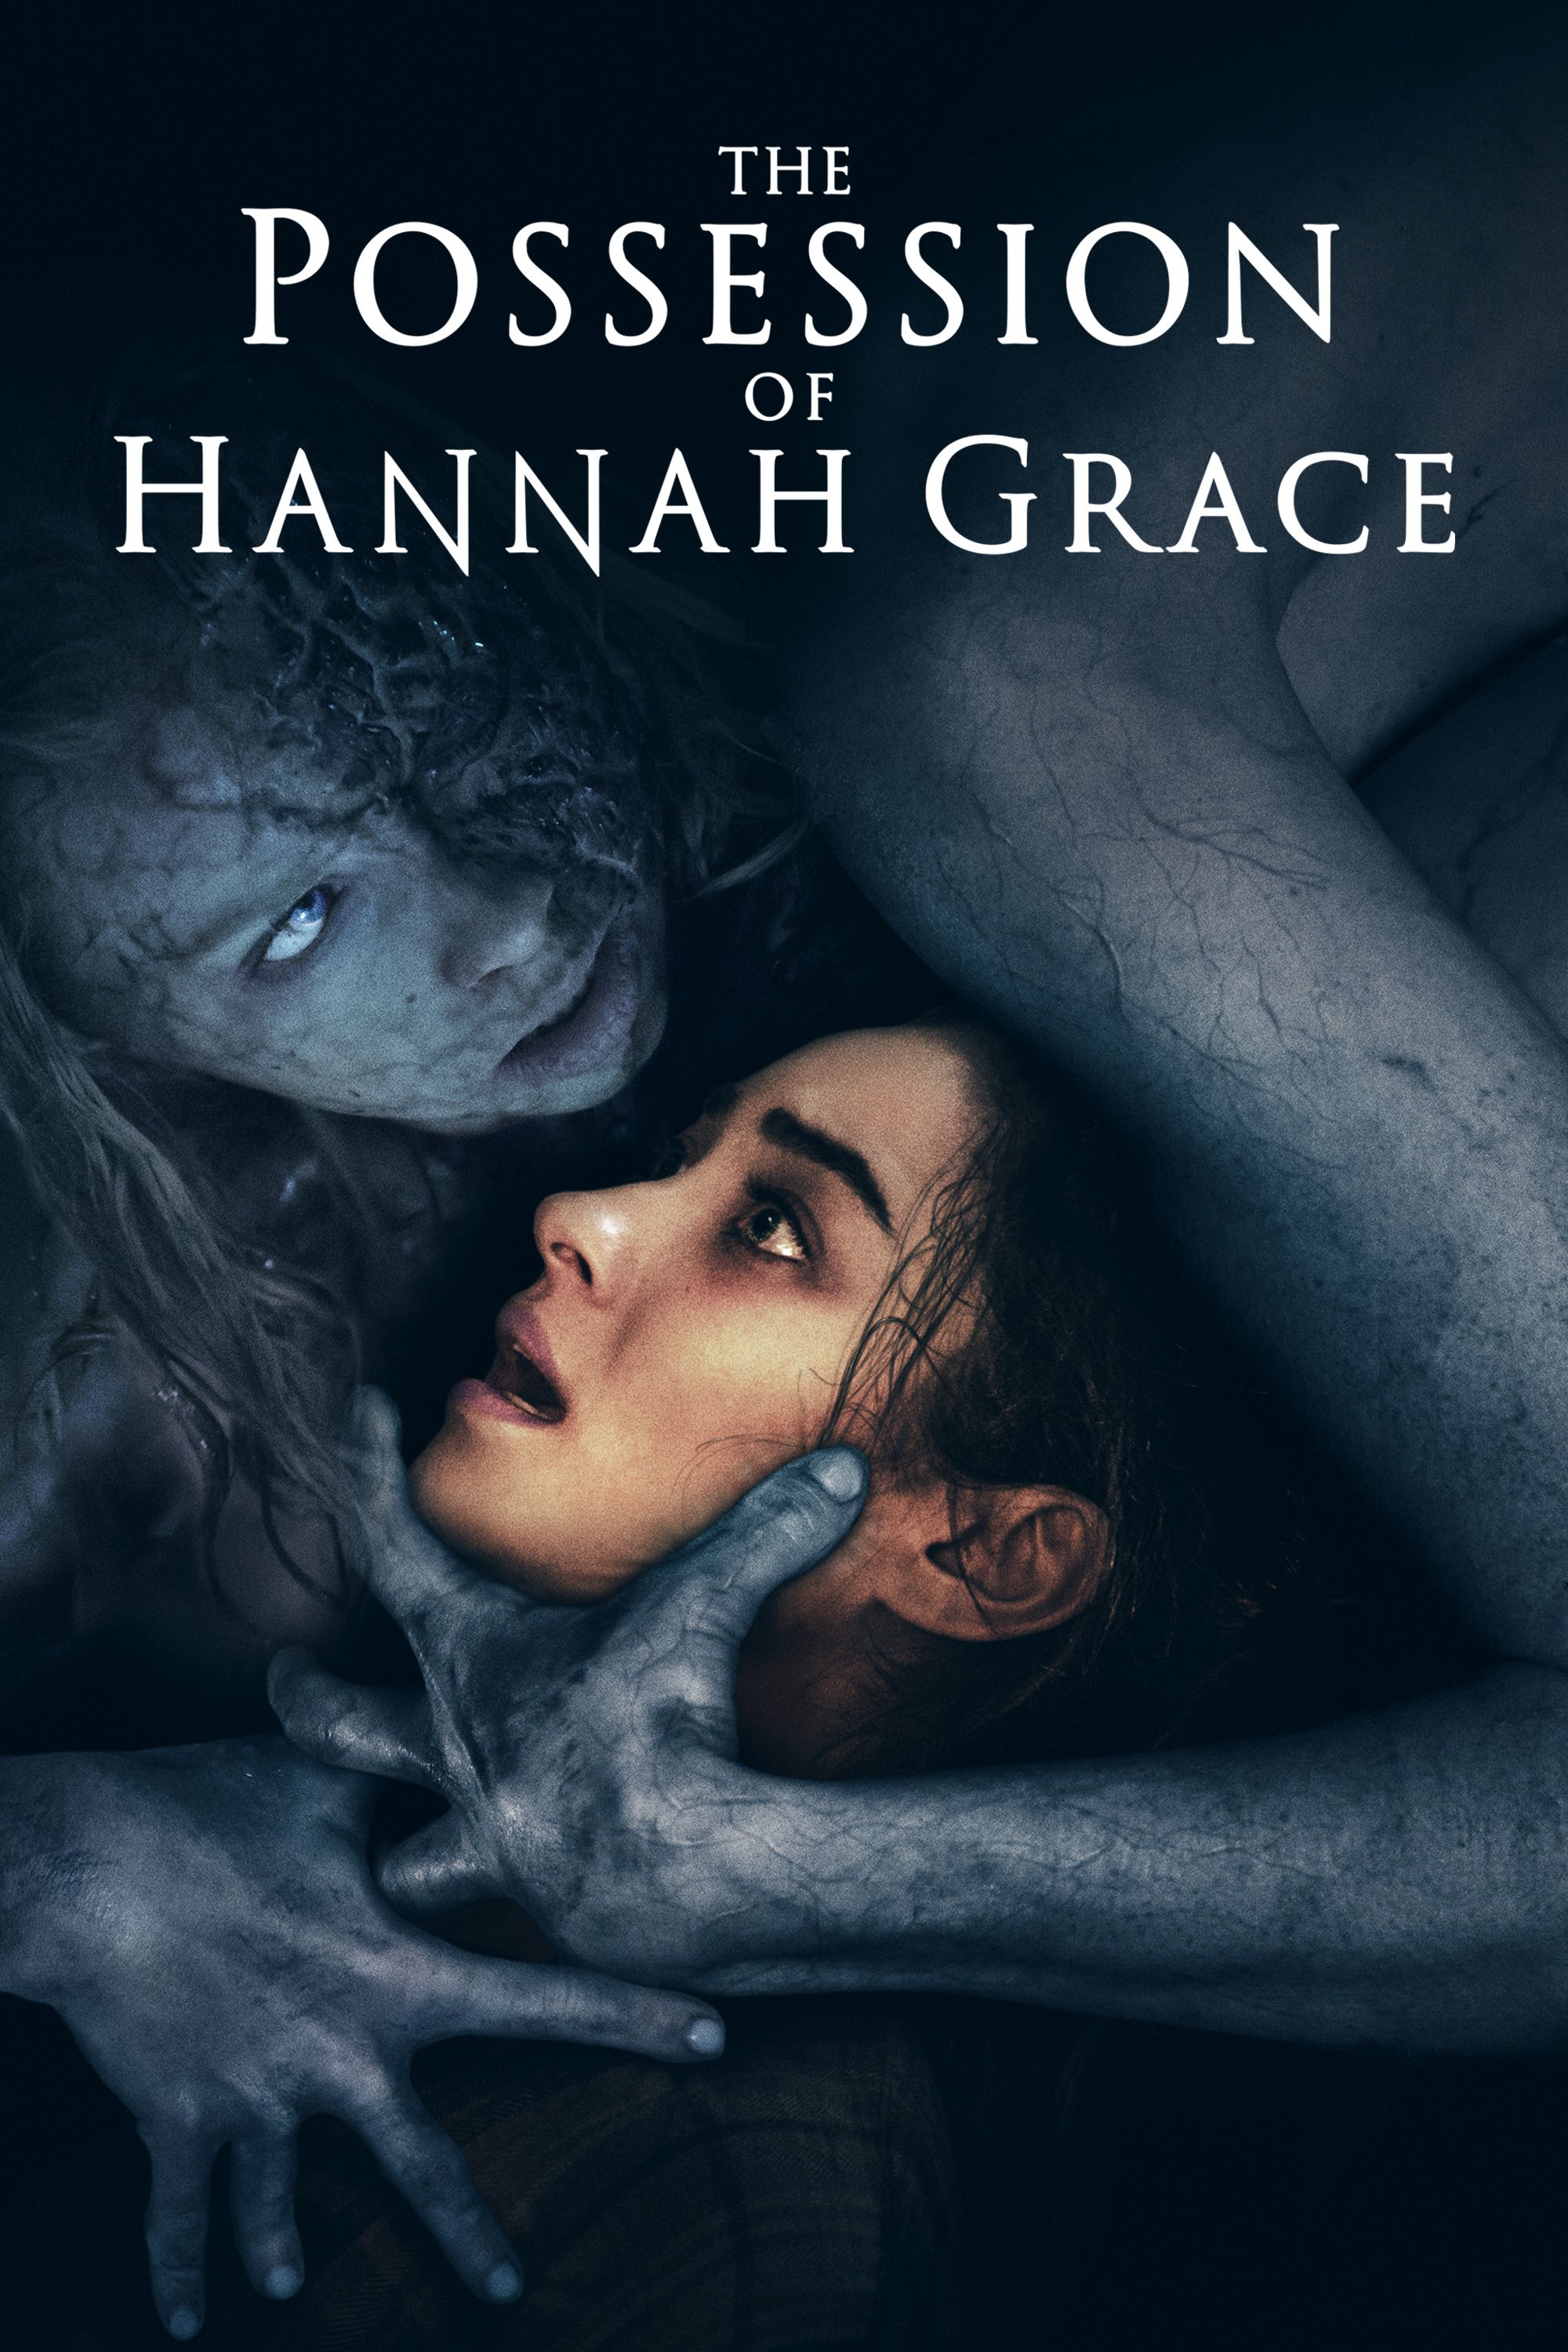 The Possession of Hannah Grace (2018) 1080p BluRay Hindi ORG Dual Audio Movie MSubs [1.7GB]